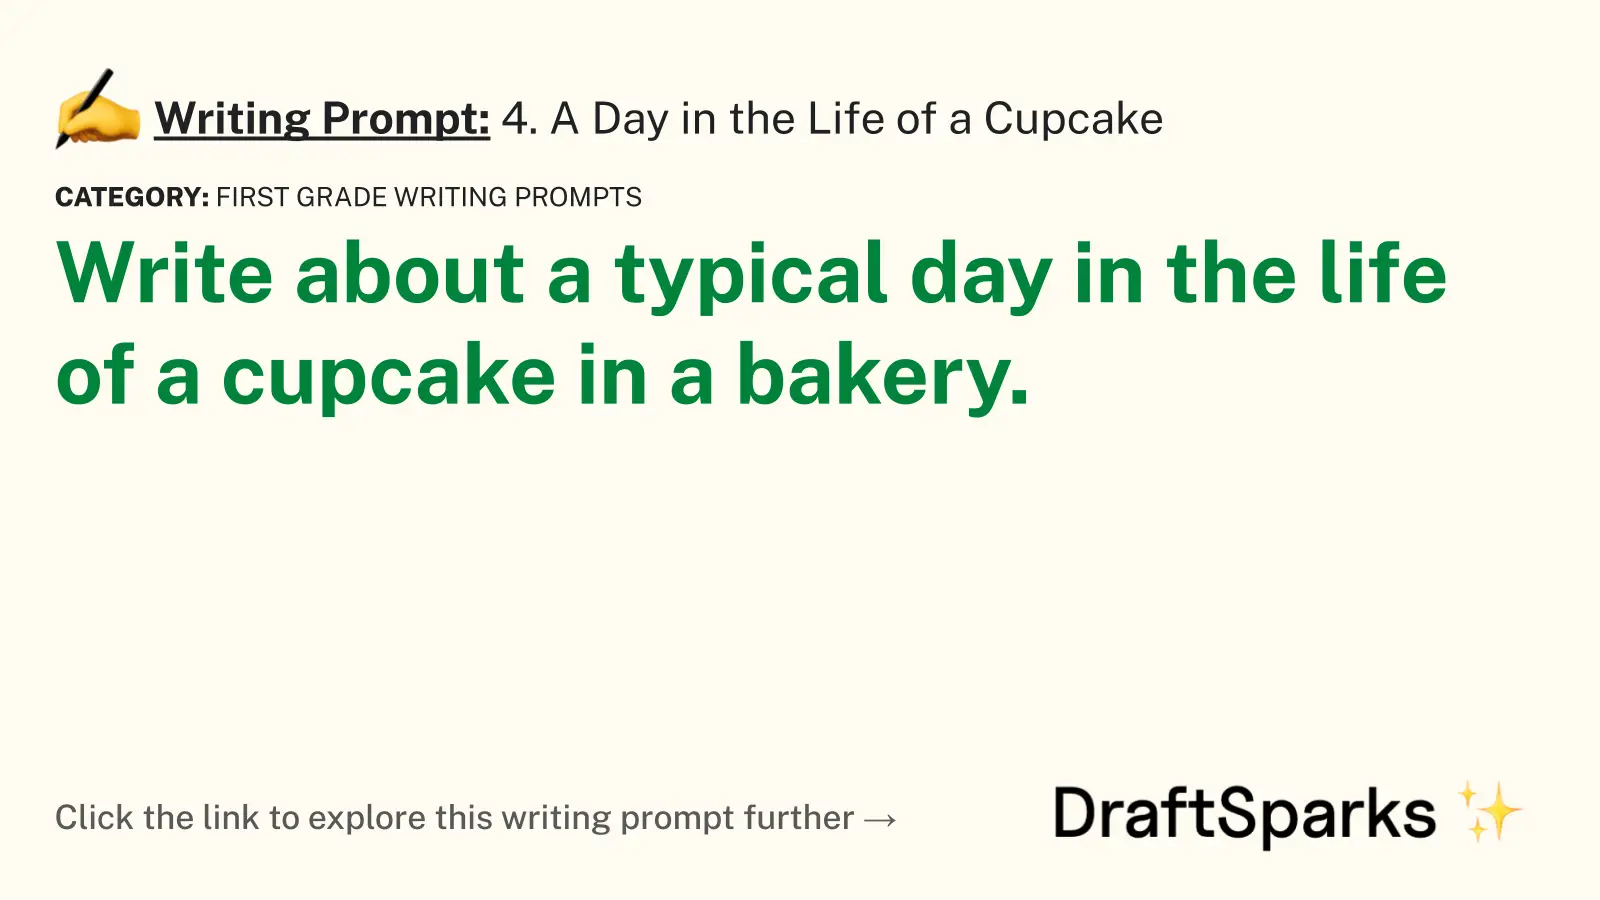 4. A Day in the Life of a Cupcake